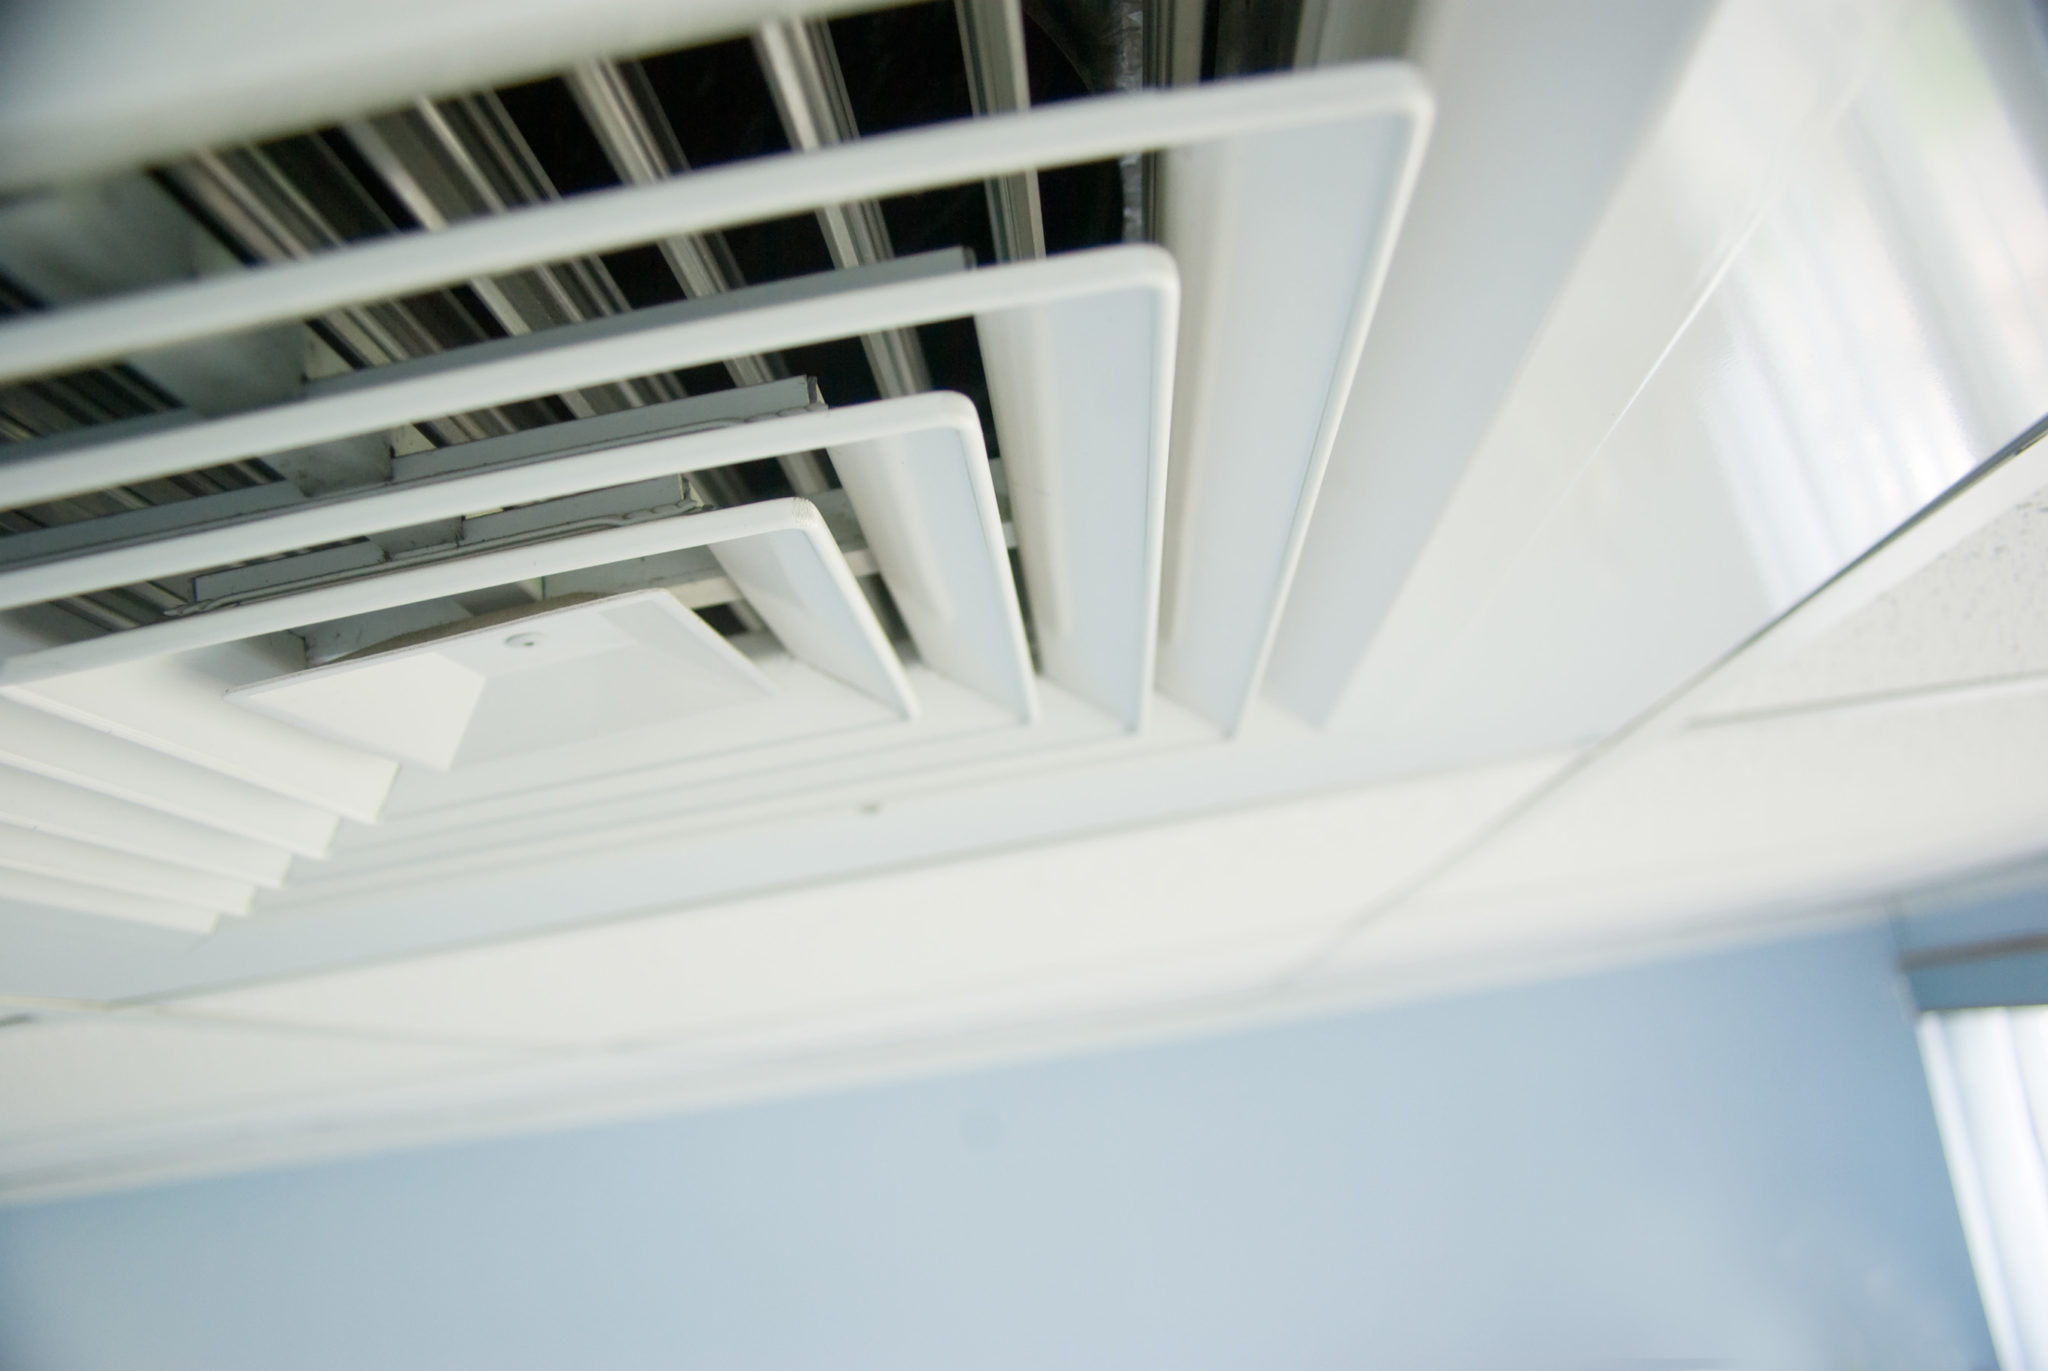 How to Know if it’s Good HVAC Ductwork Design